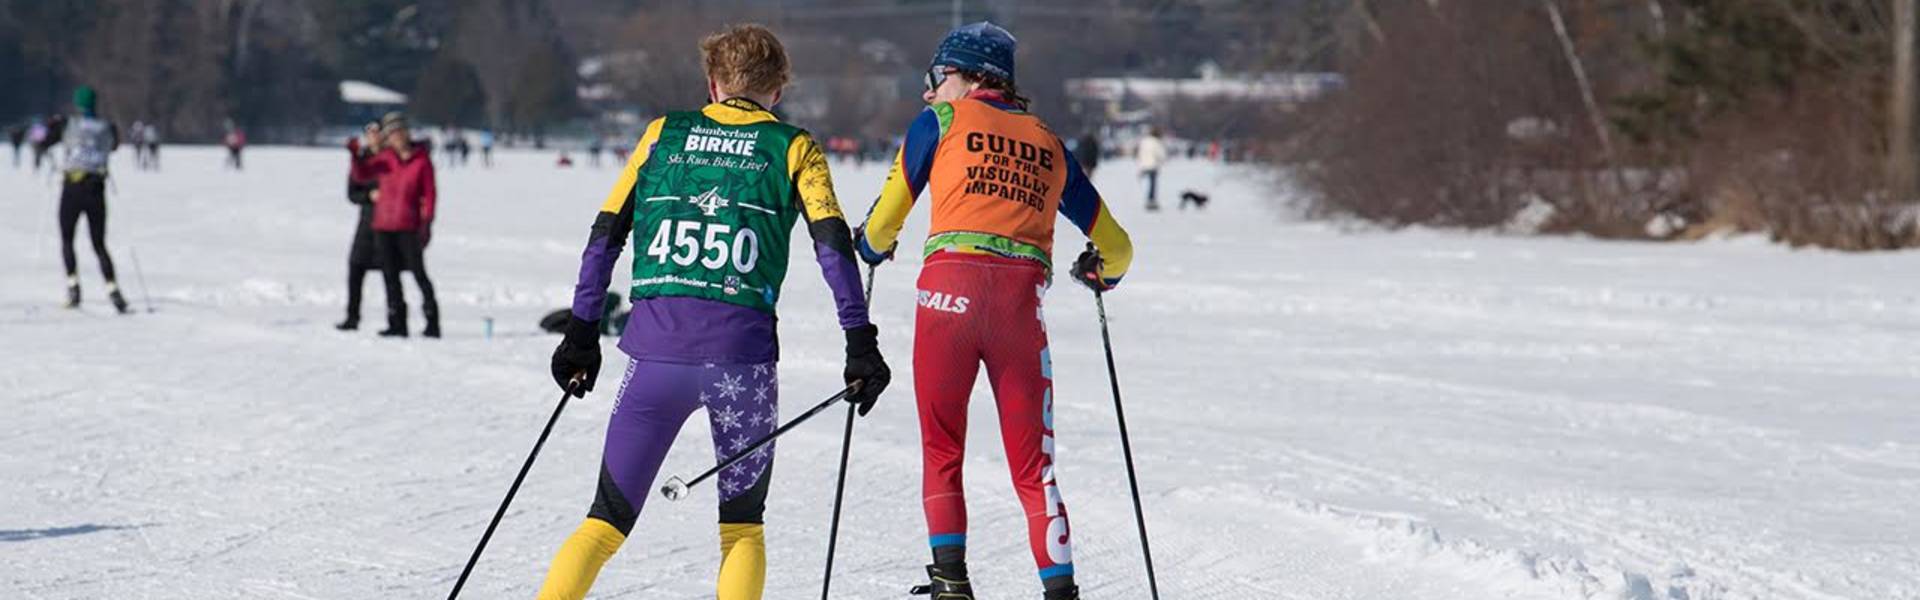 Wyatt Pajtash guiding visually impaired during a race